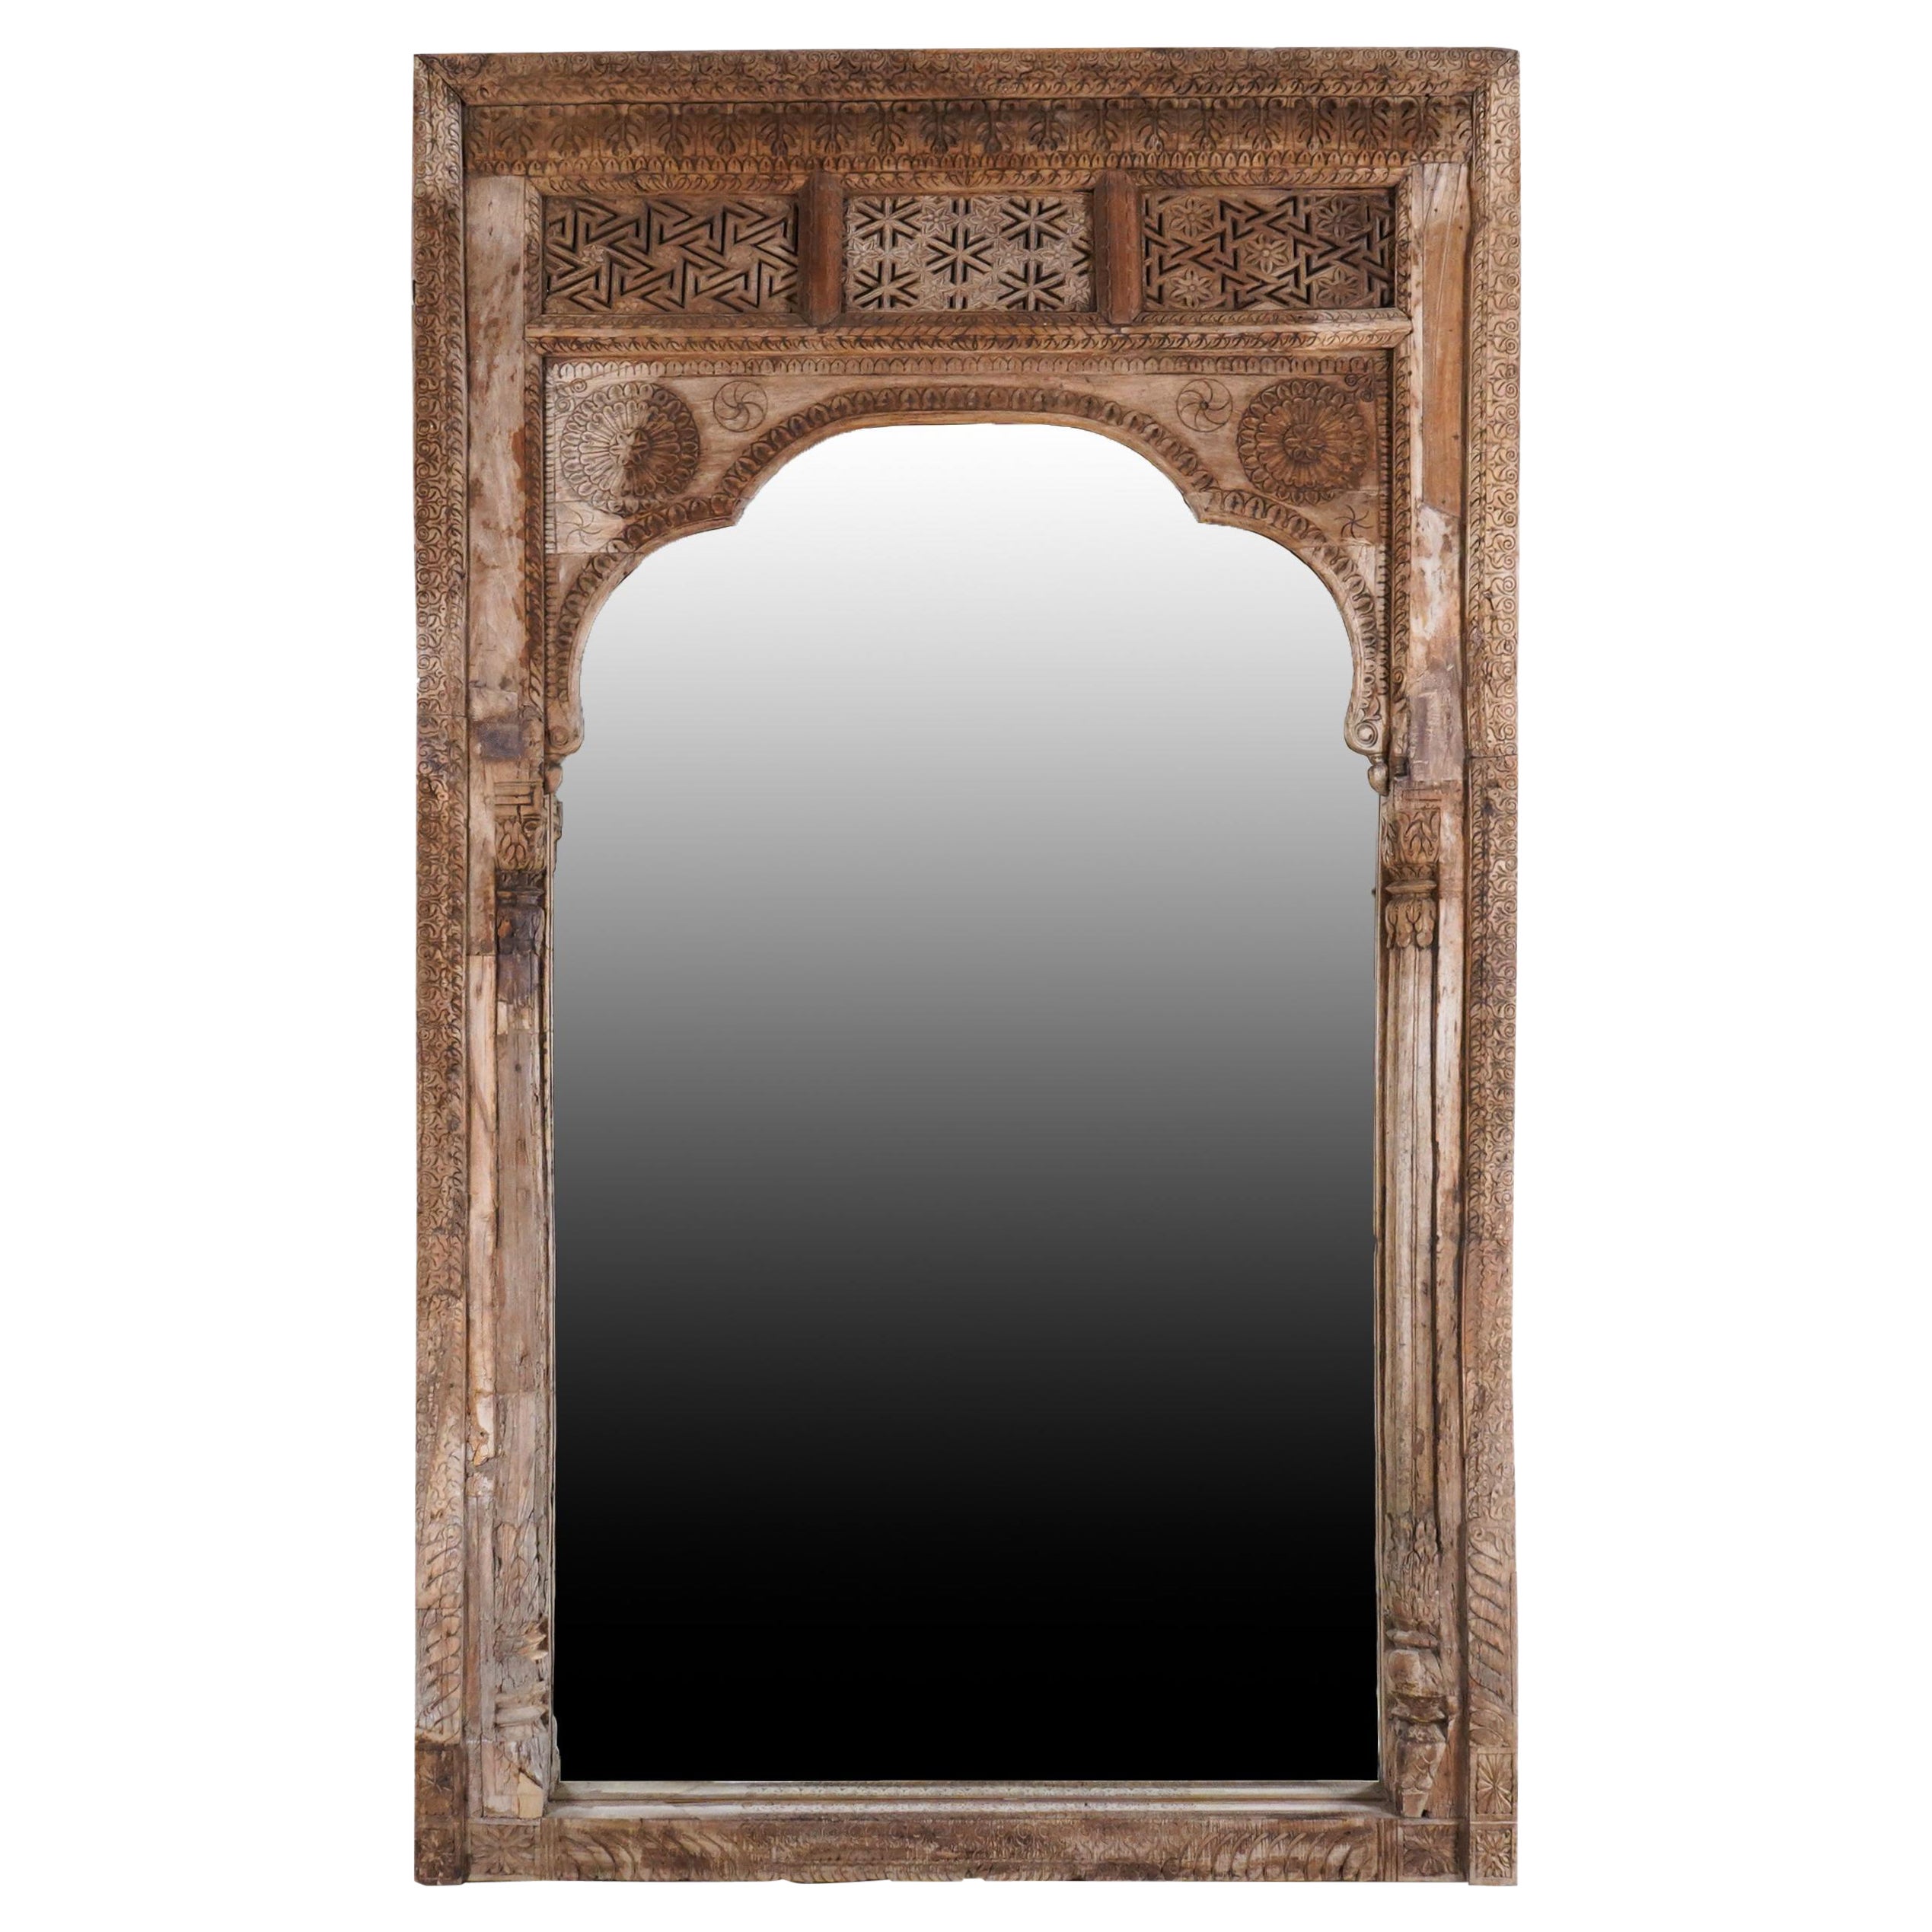 A Carved Mirror Frame For Sale